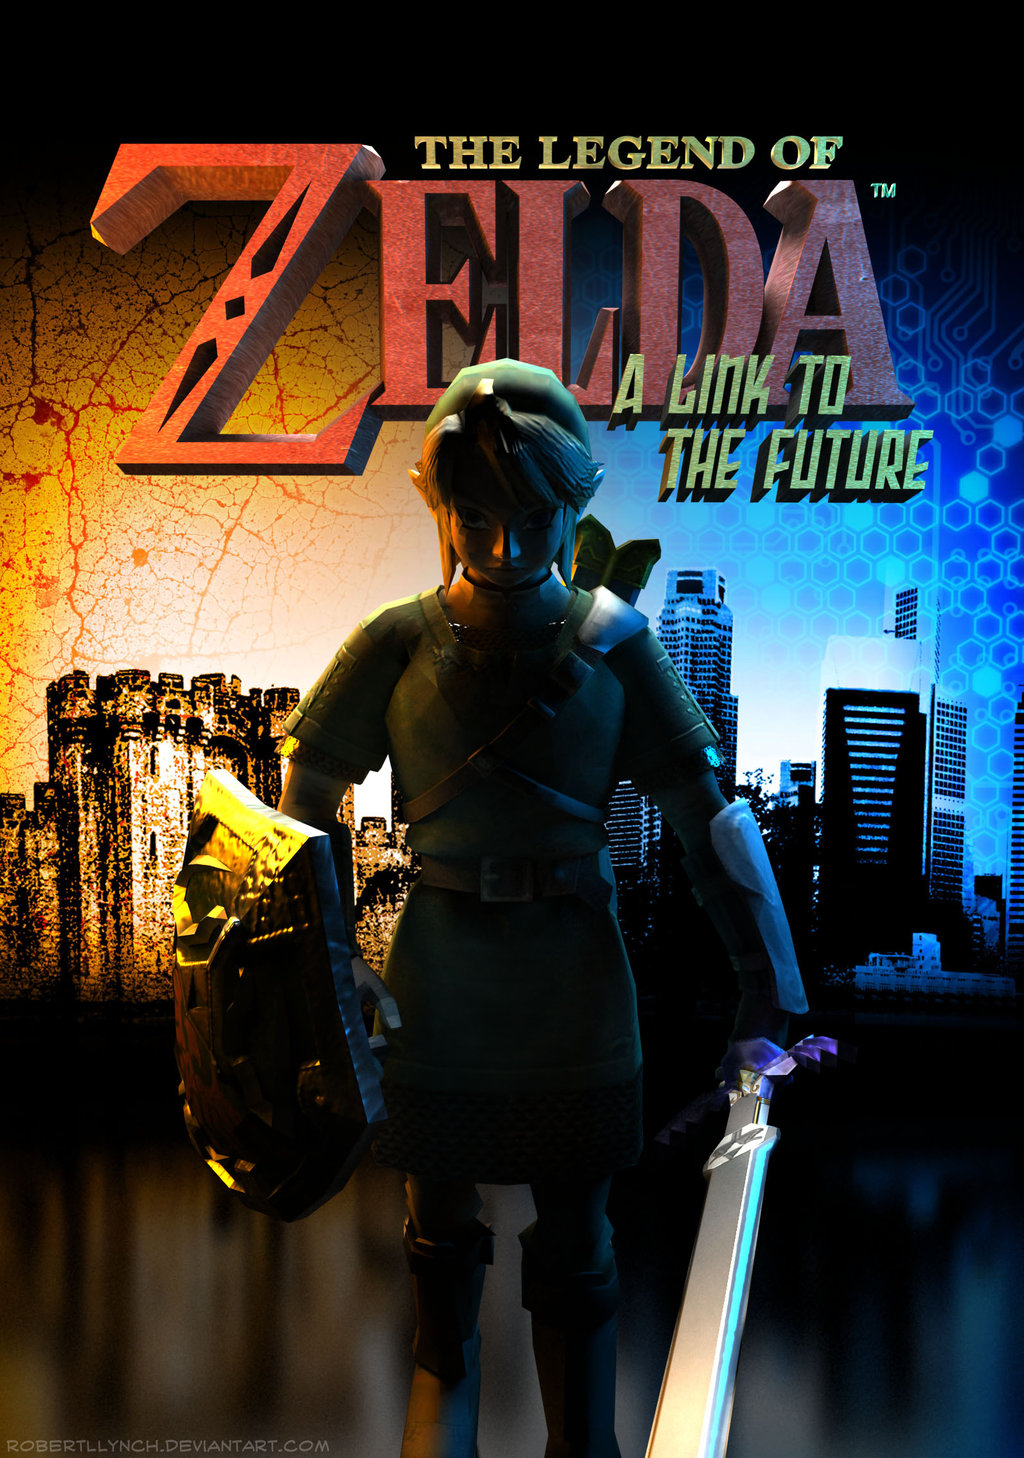 The Legend of Zelda: A Link to the Future (Poster) - 2013